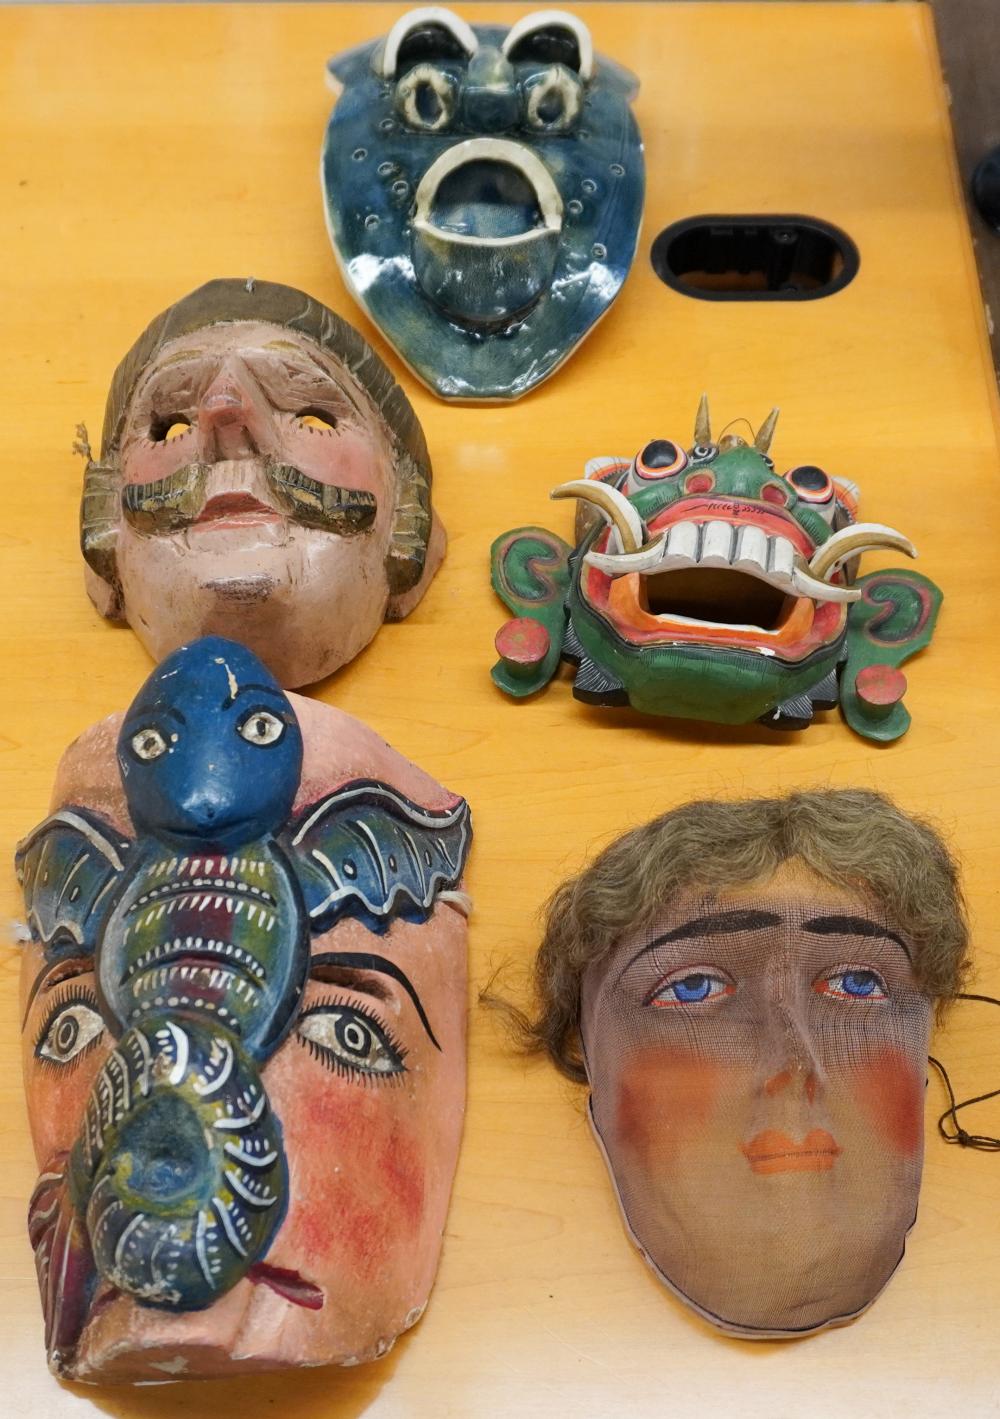 GROUP OF ASSORTED MASKSGroup of